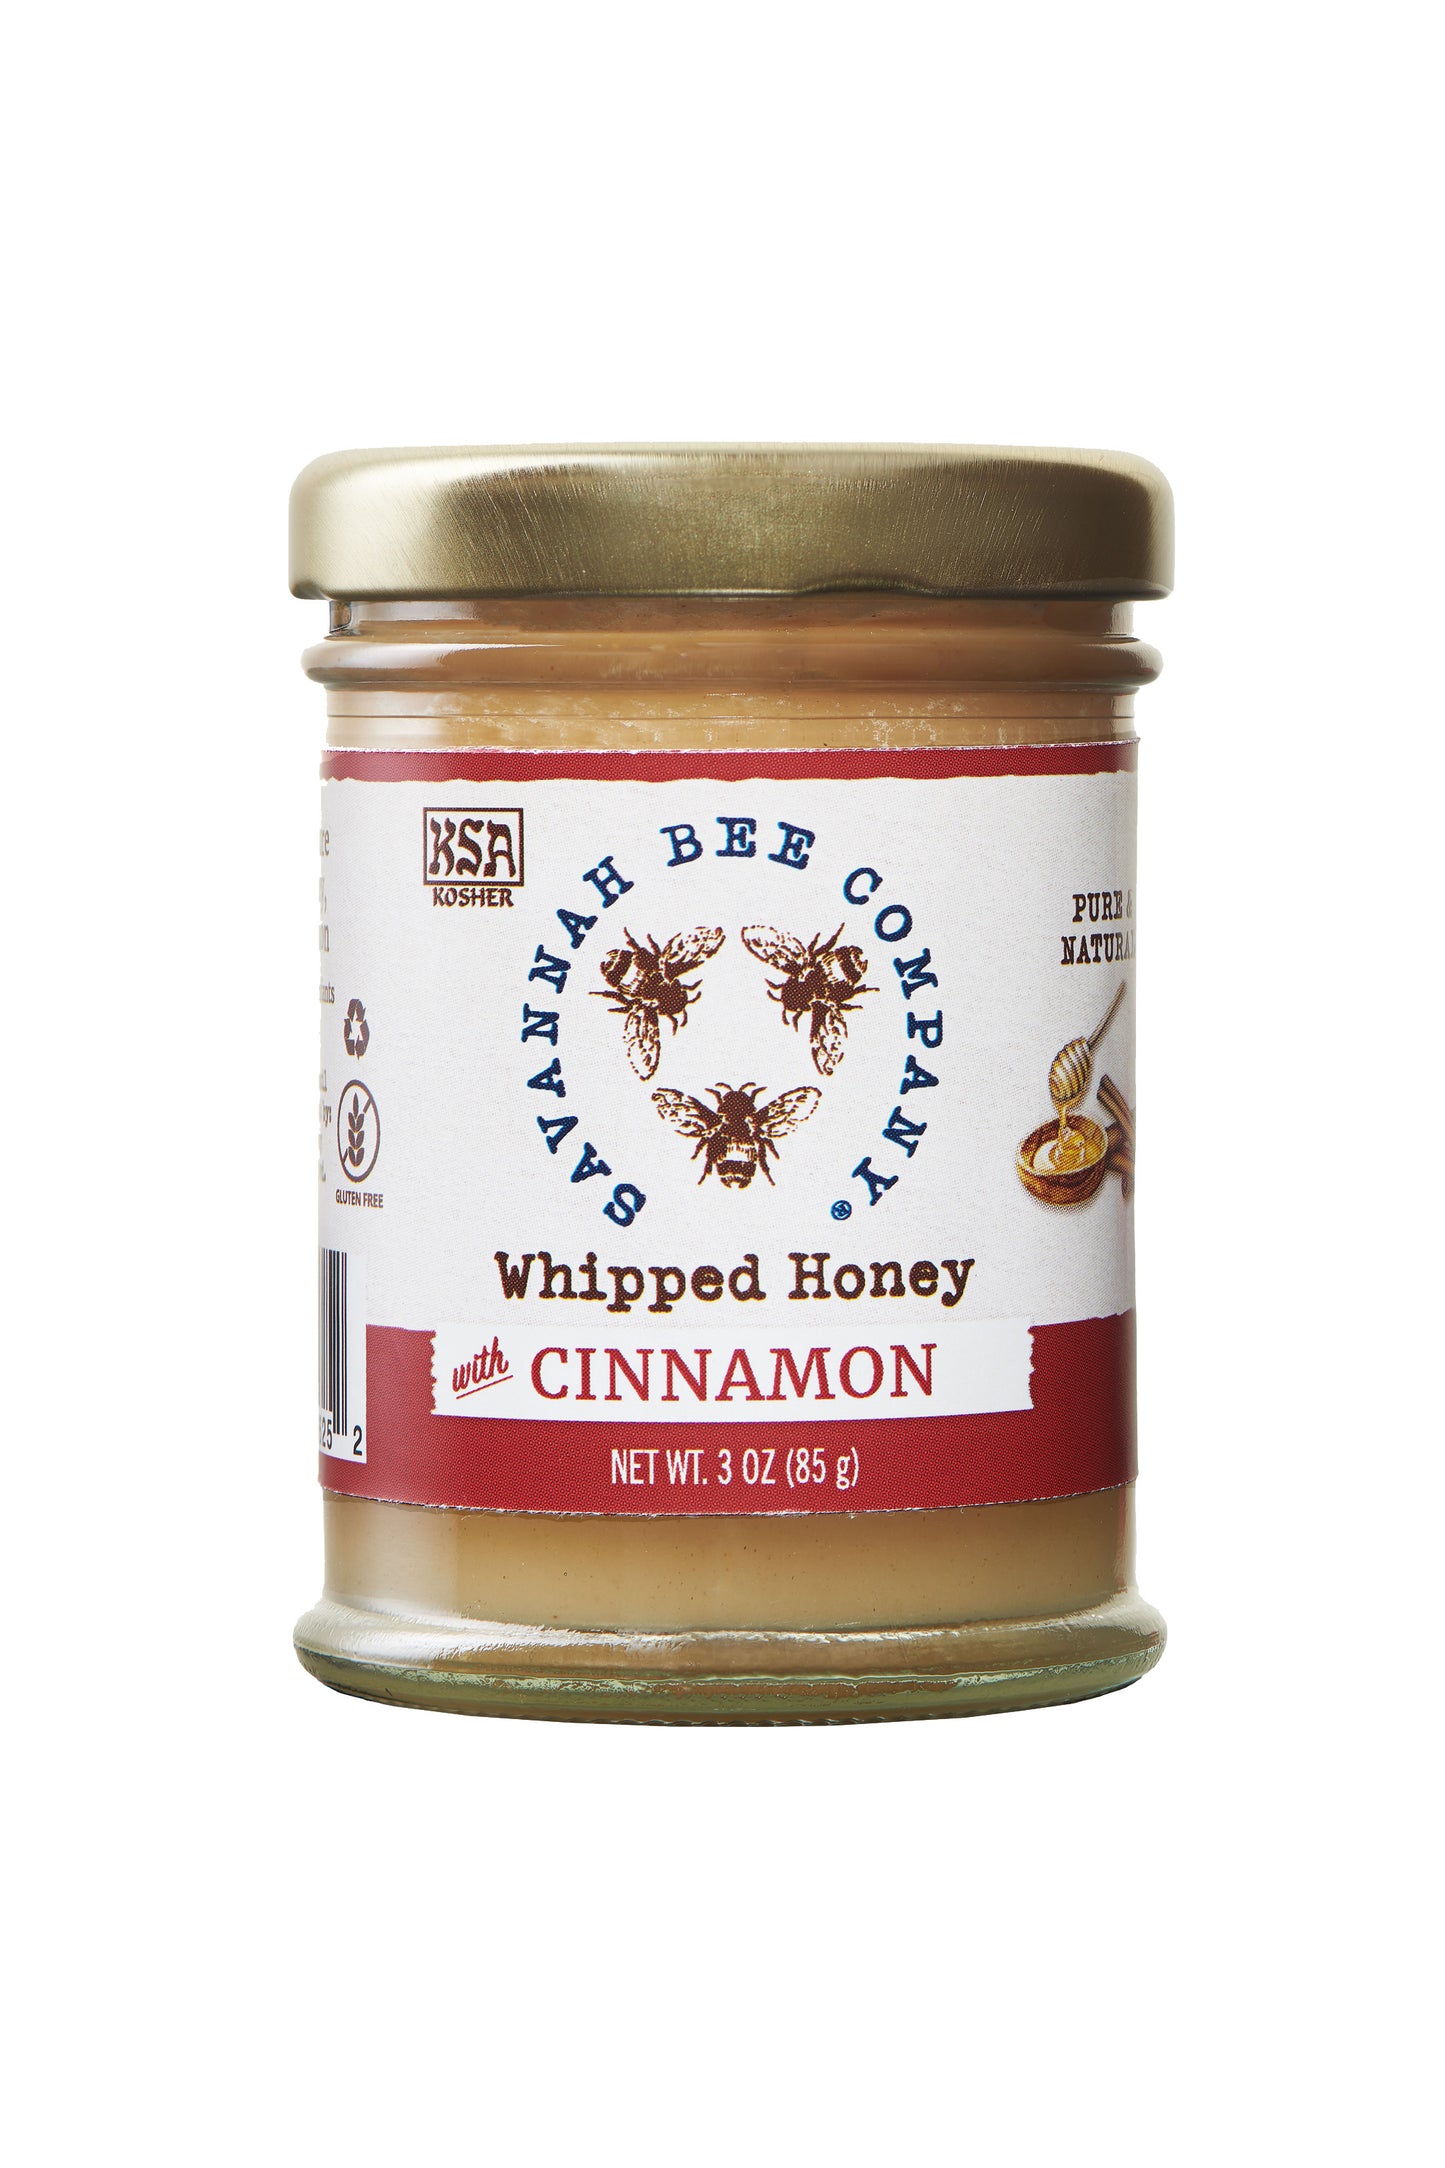 Whipped Honey with Cinnamon 3 oz.